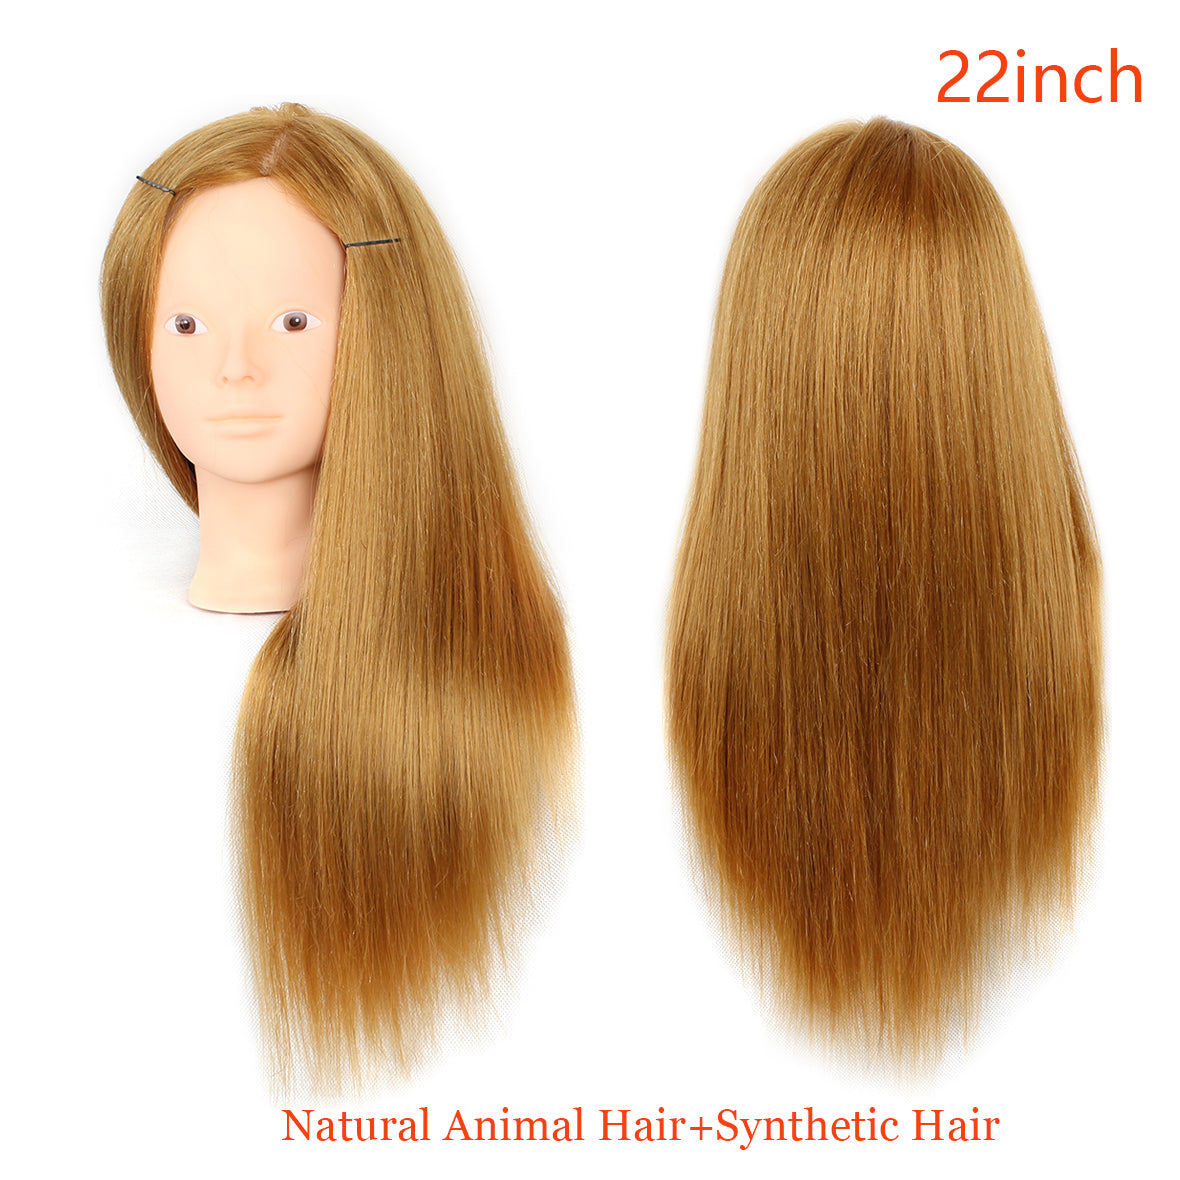 22/26Inch Pro training Hair Styling Mannequin Head Hair Long Hair Hairstyle Hairdressing Training Doll Female Mannequins With Wig